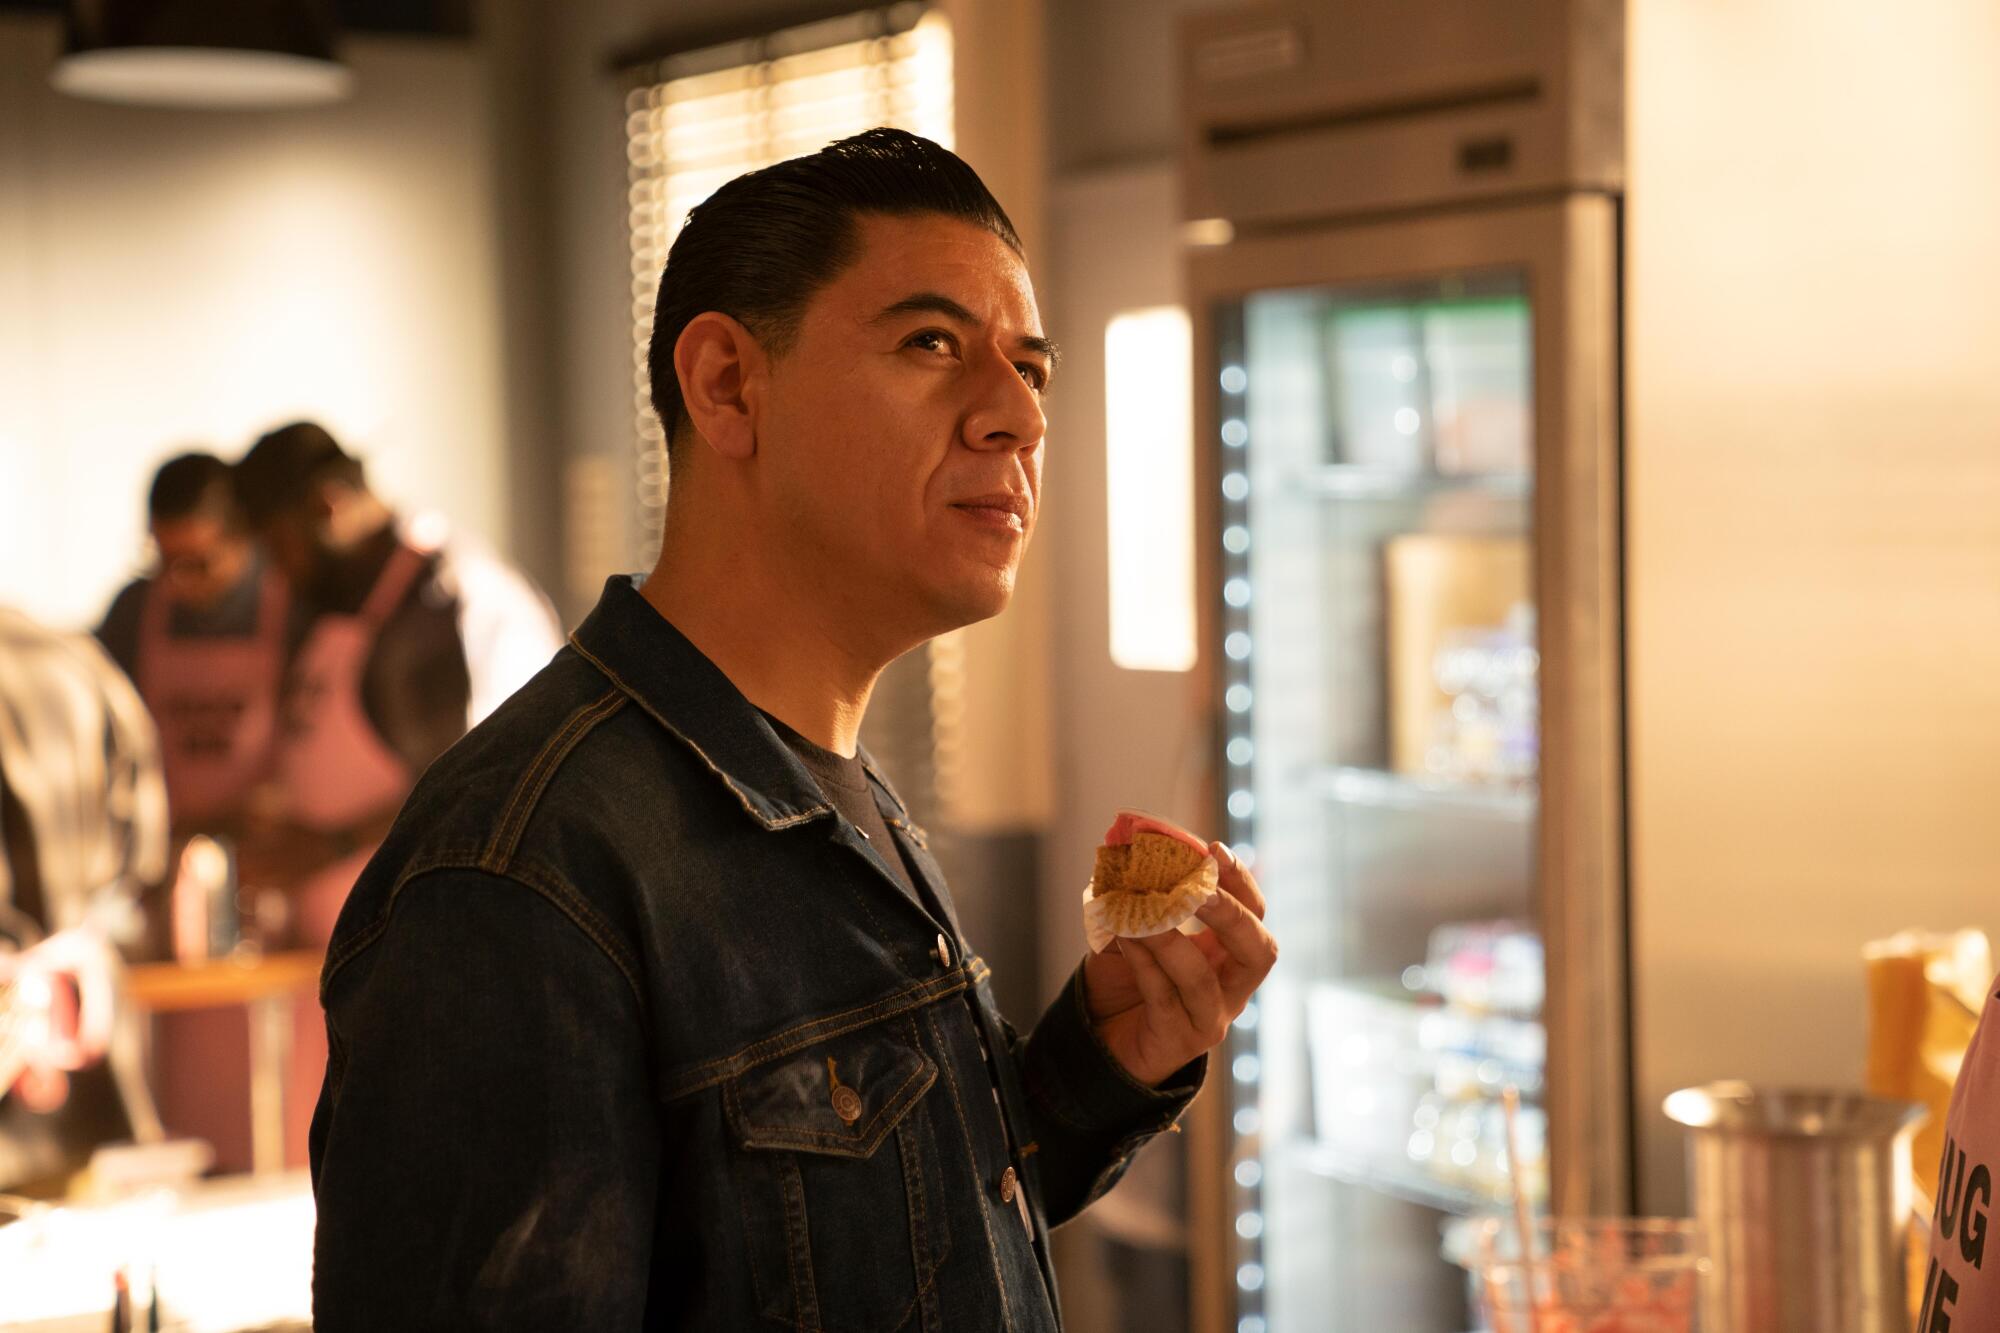 A man in a denim jacket looks contemplative as he eats a cupcake with pink frosting.